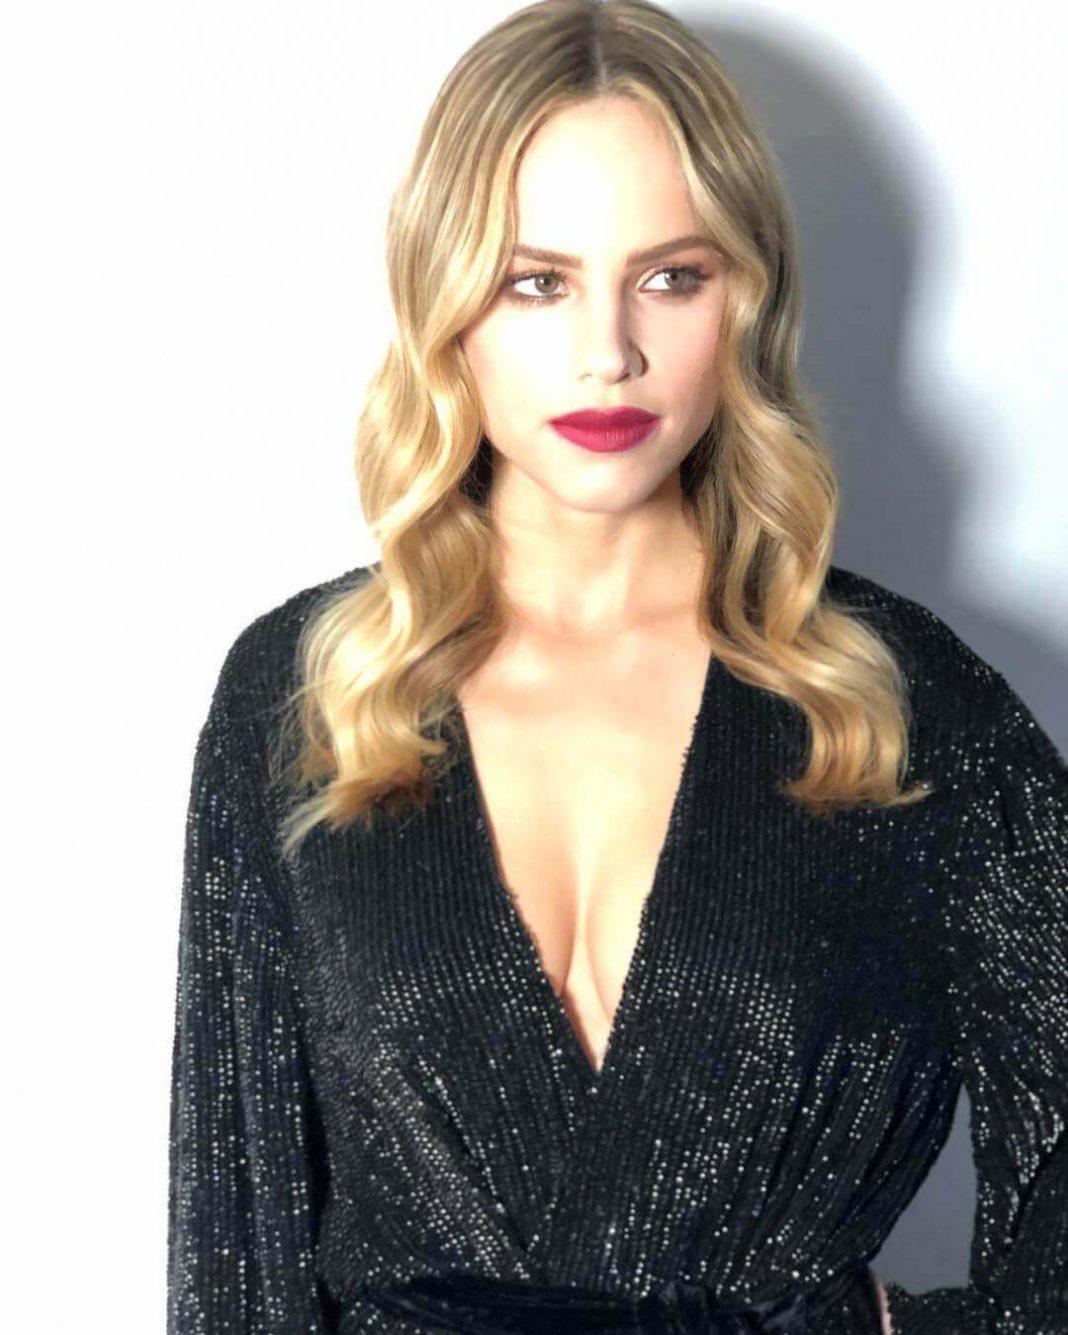 49 Halston Sage Nude Pictures Which Prove Beauty Beyond Recognition 98